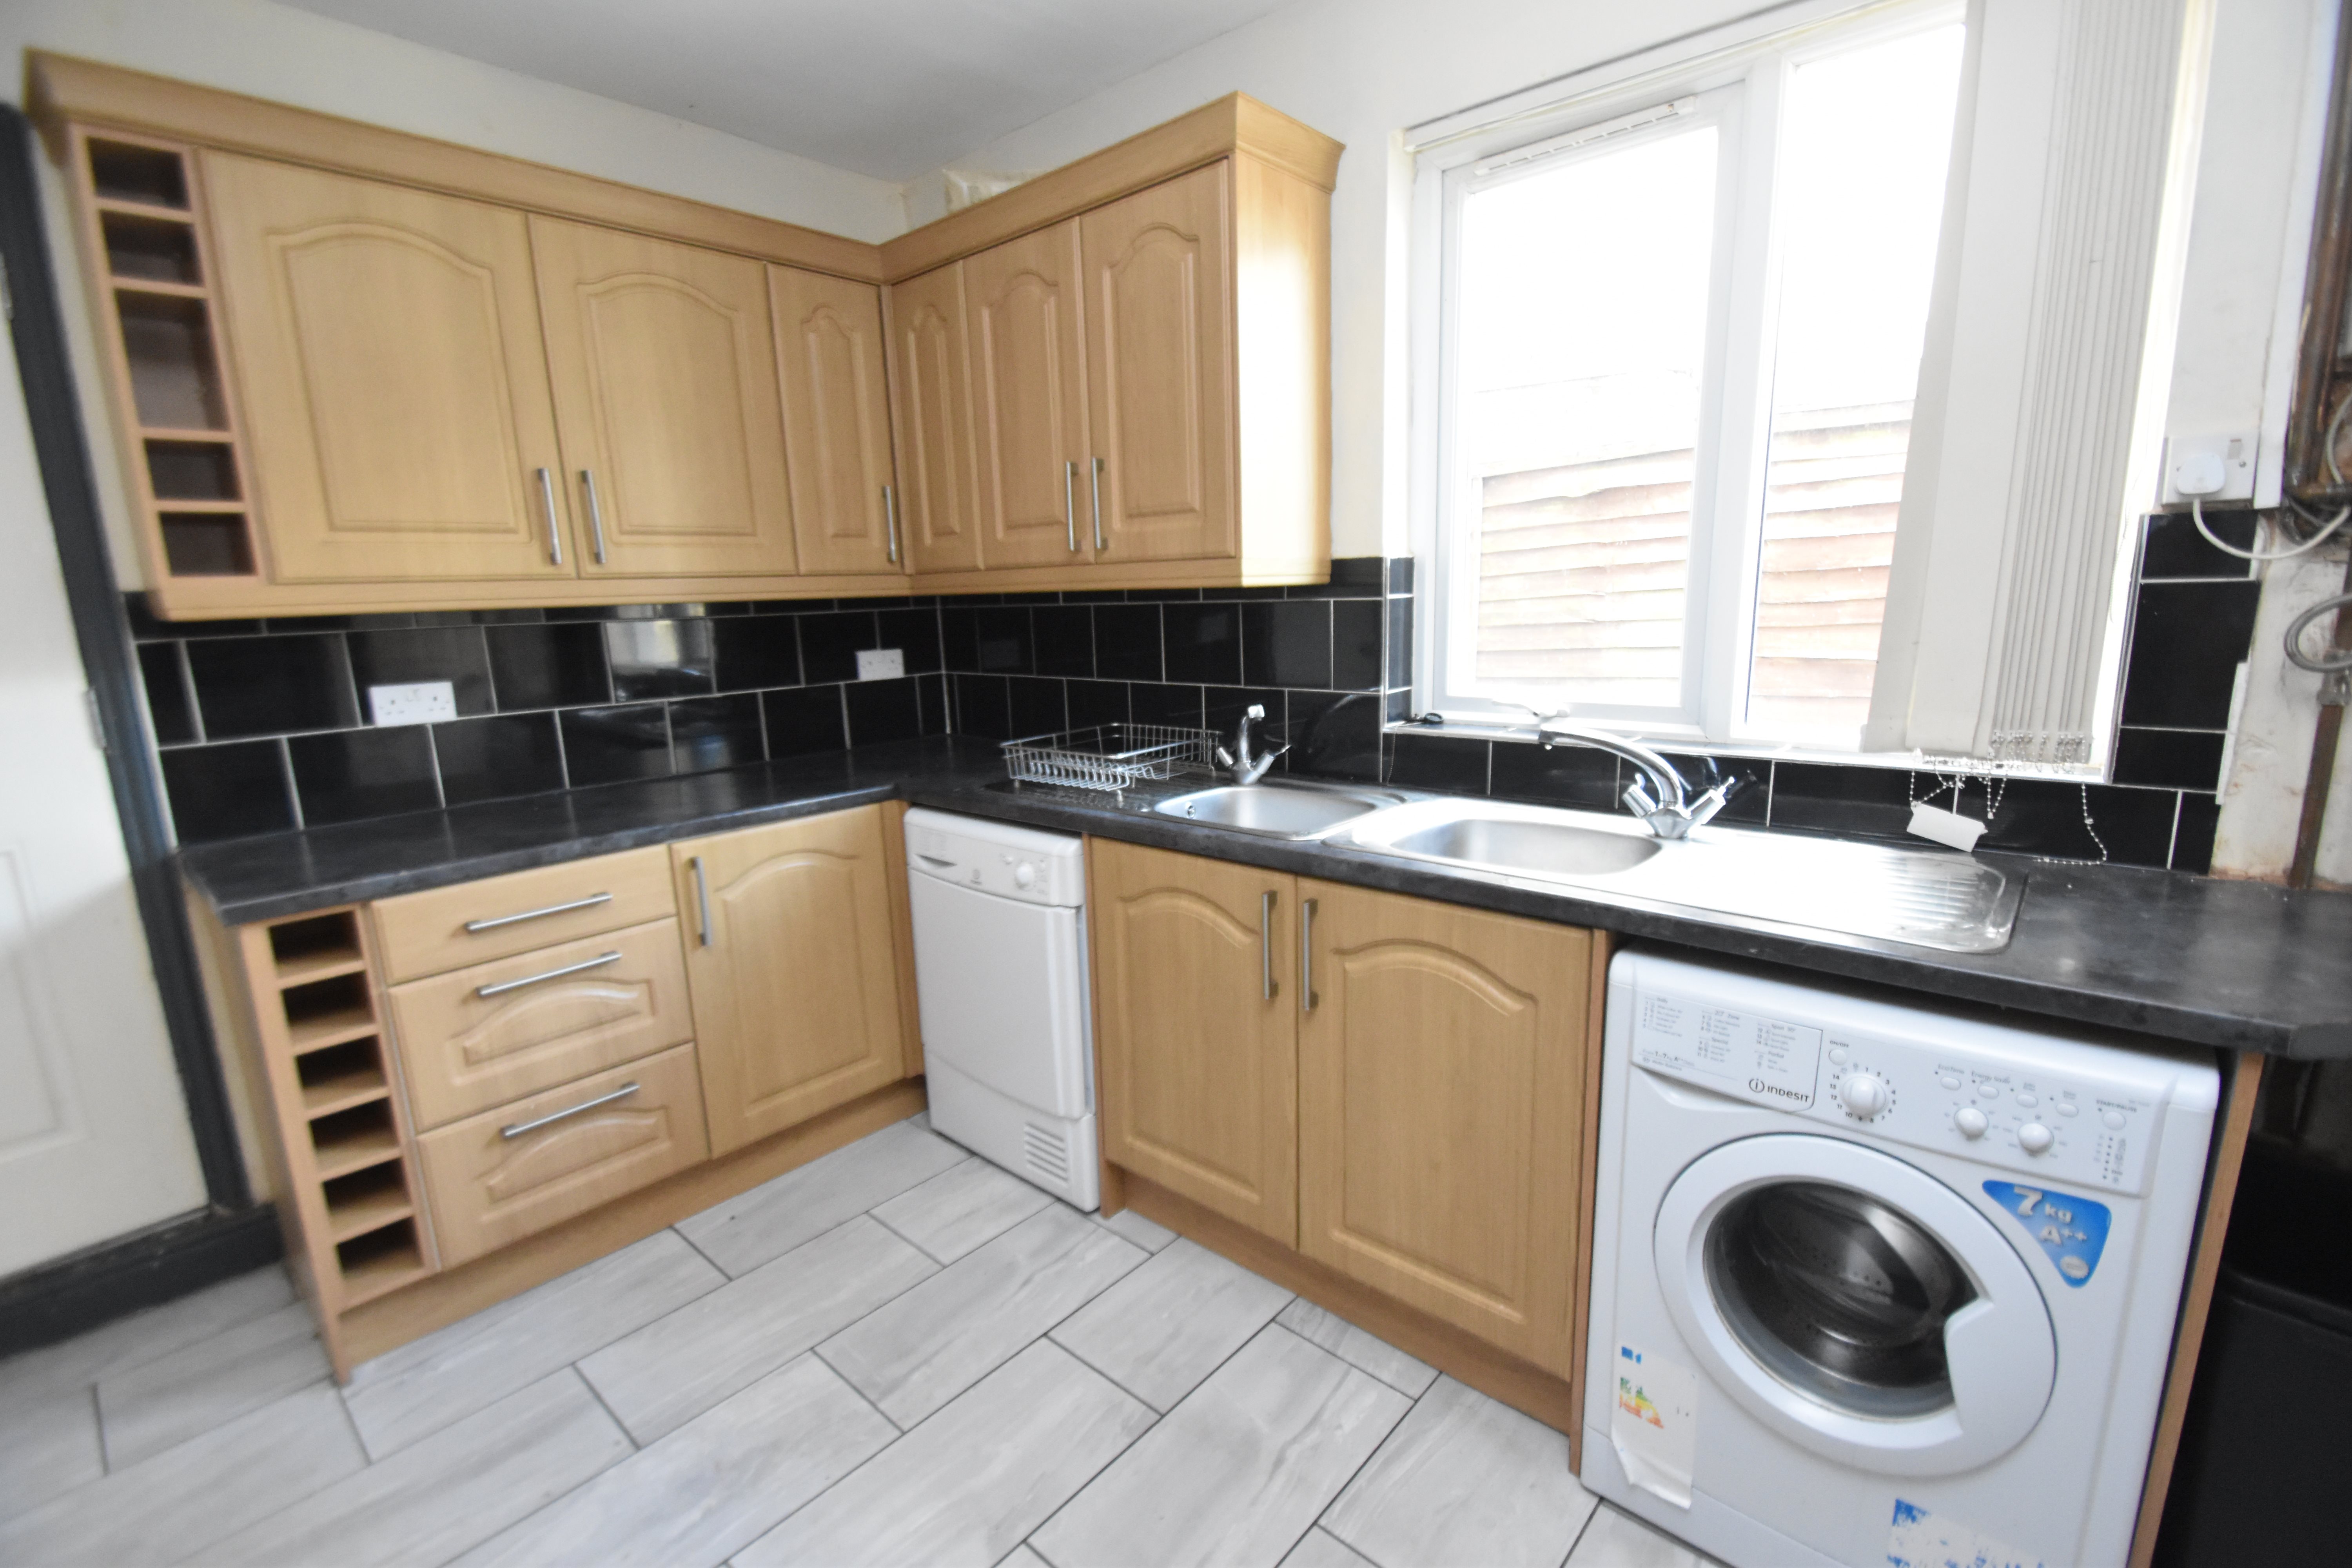 8 bed house to rent in Harriet Street, CATHAYS  - Property Image 14